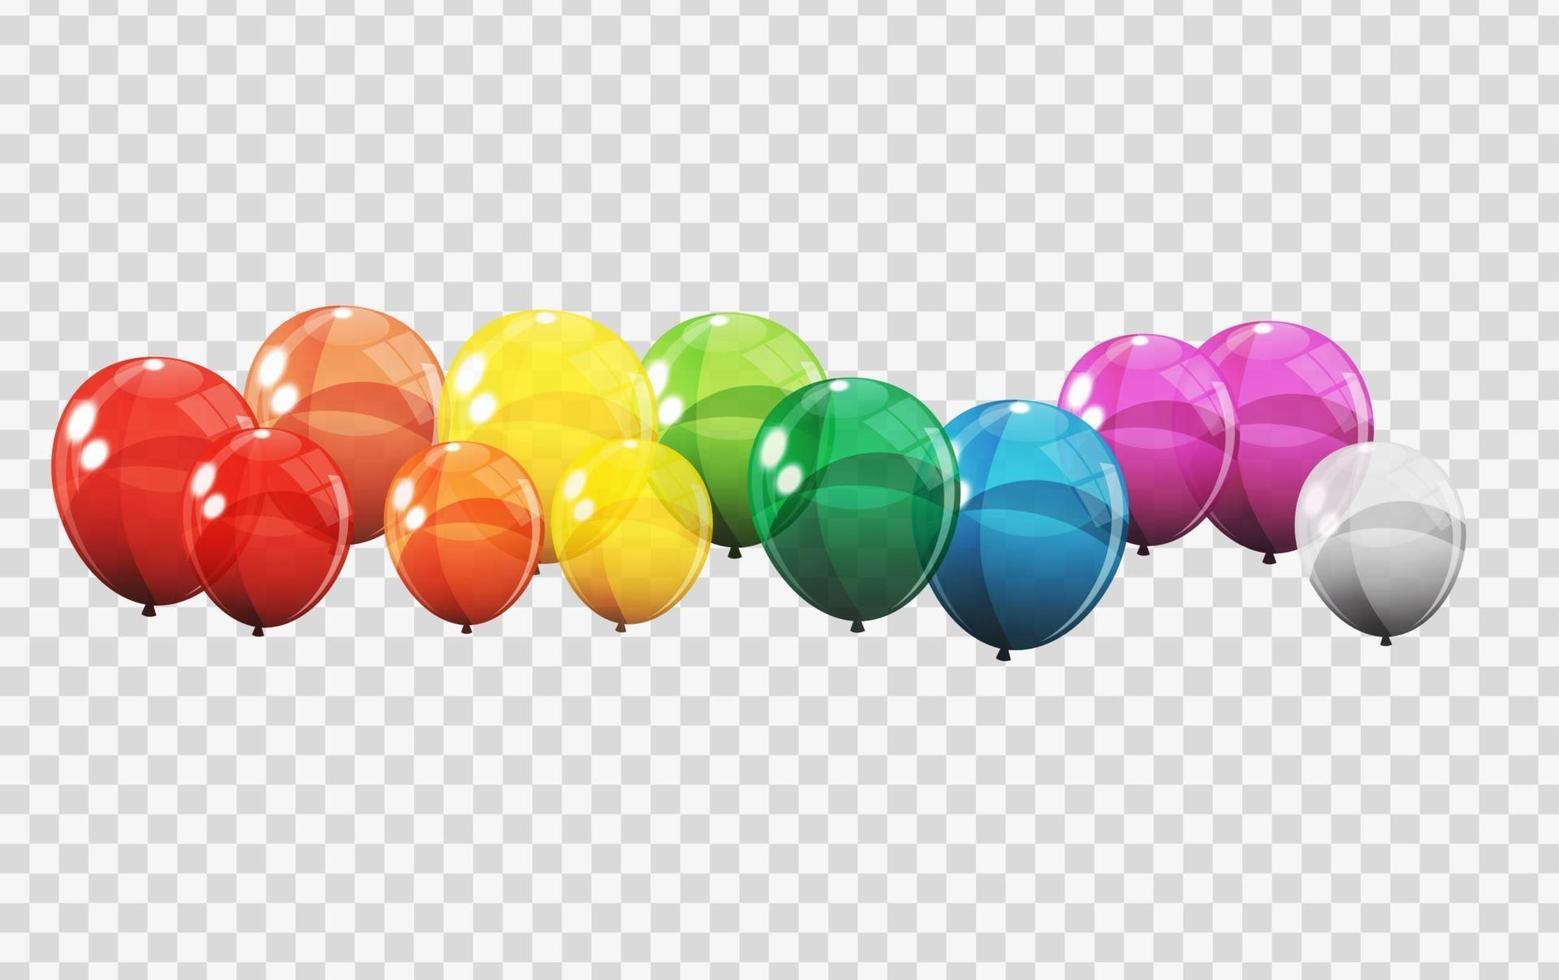 Group of Colour Glossy Helium Balloons Isolated. Set of Balloons for Birthday Anniversary Celebration. Party Decorations vector